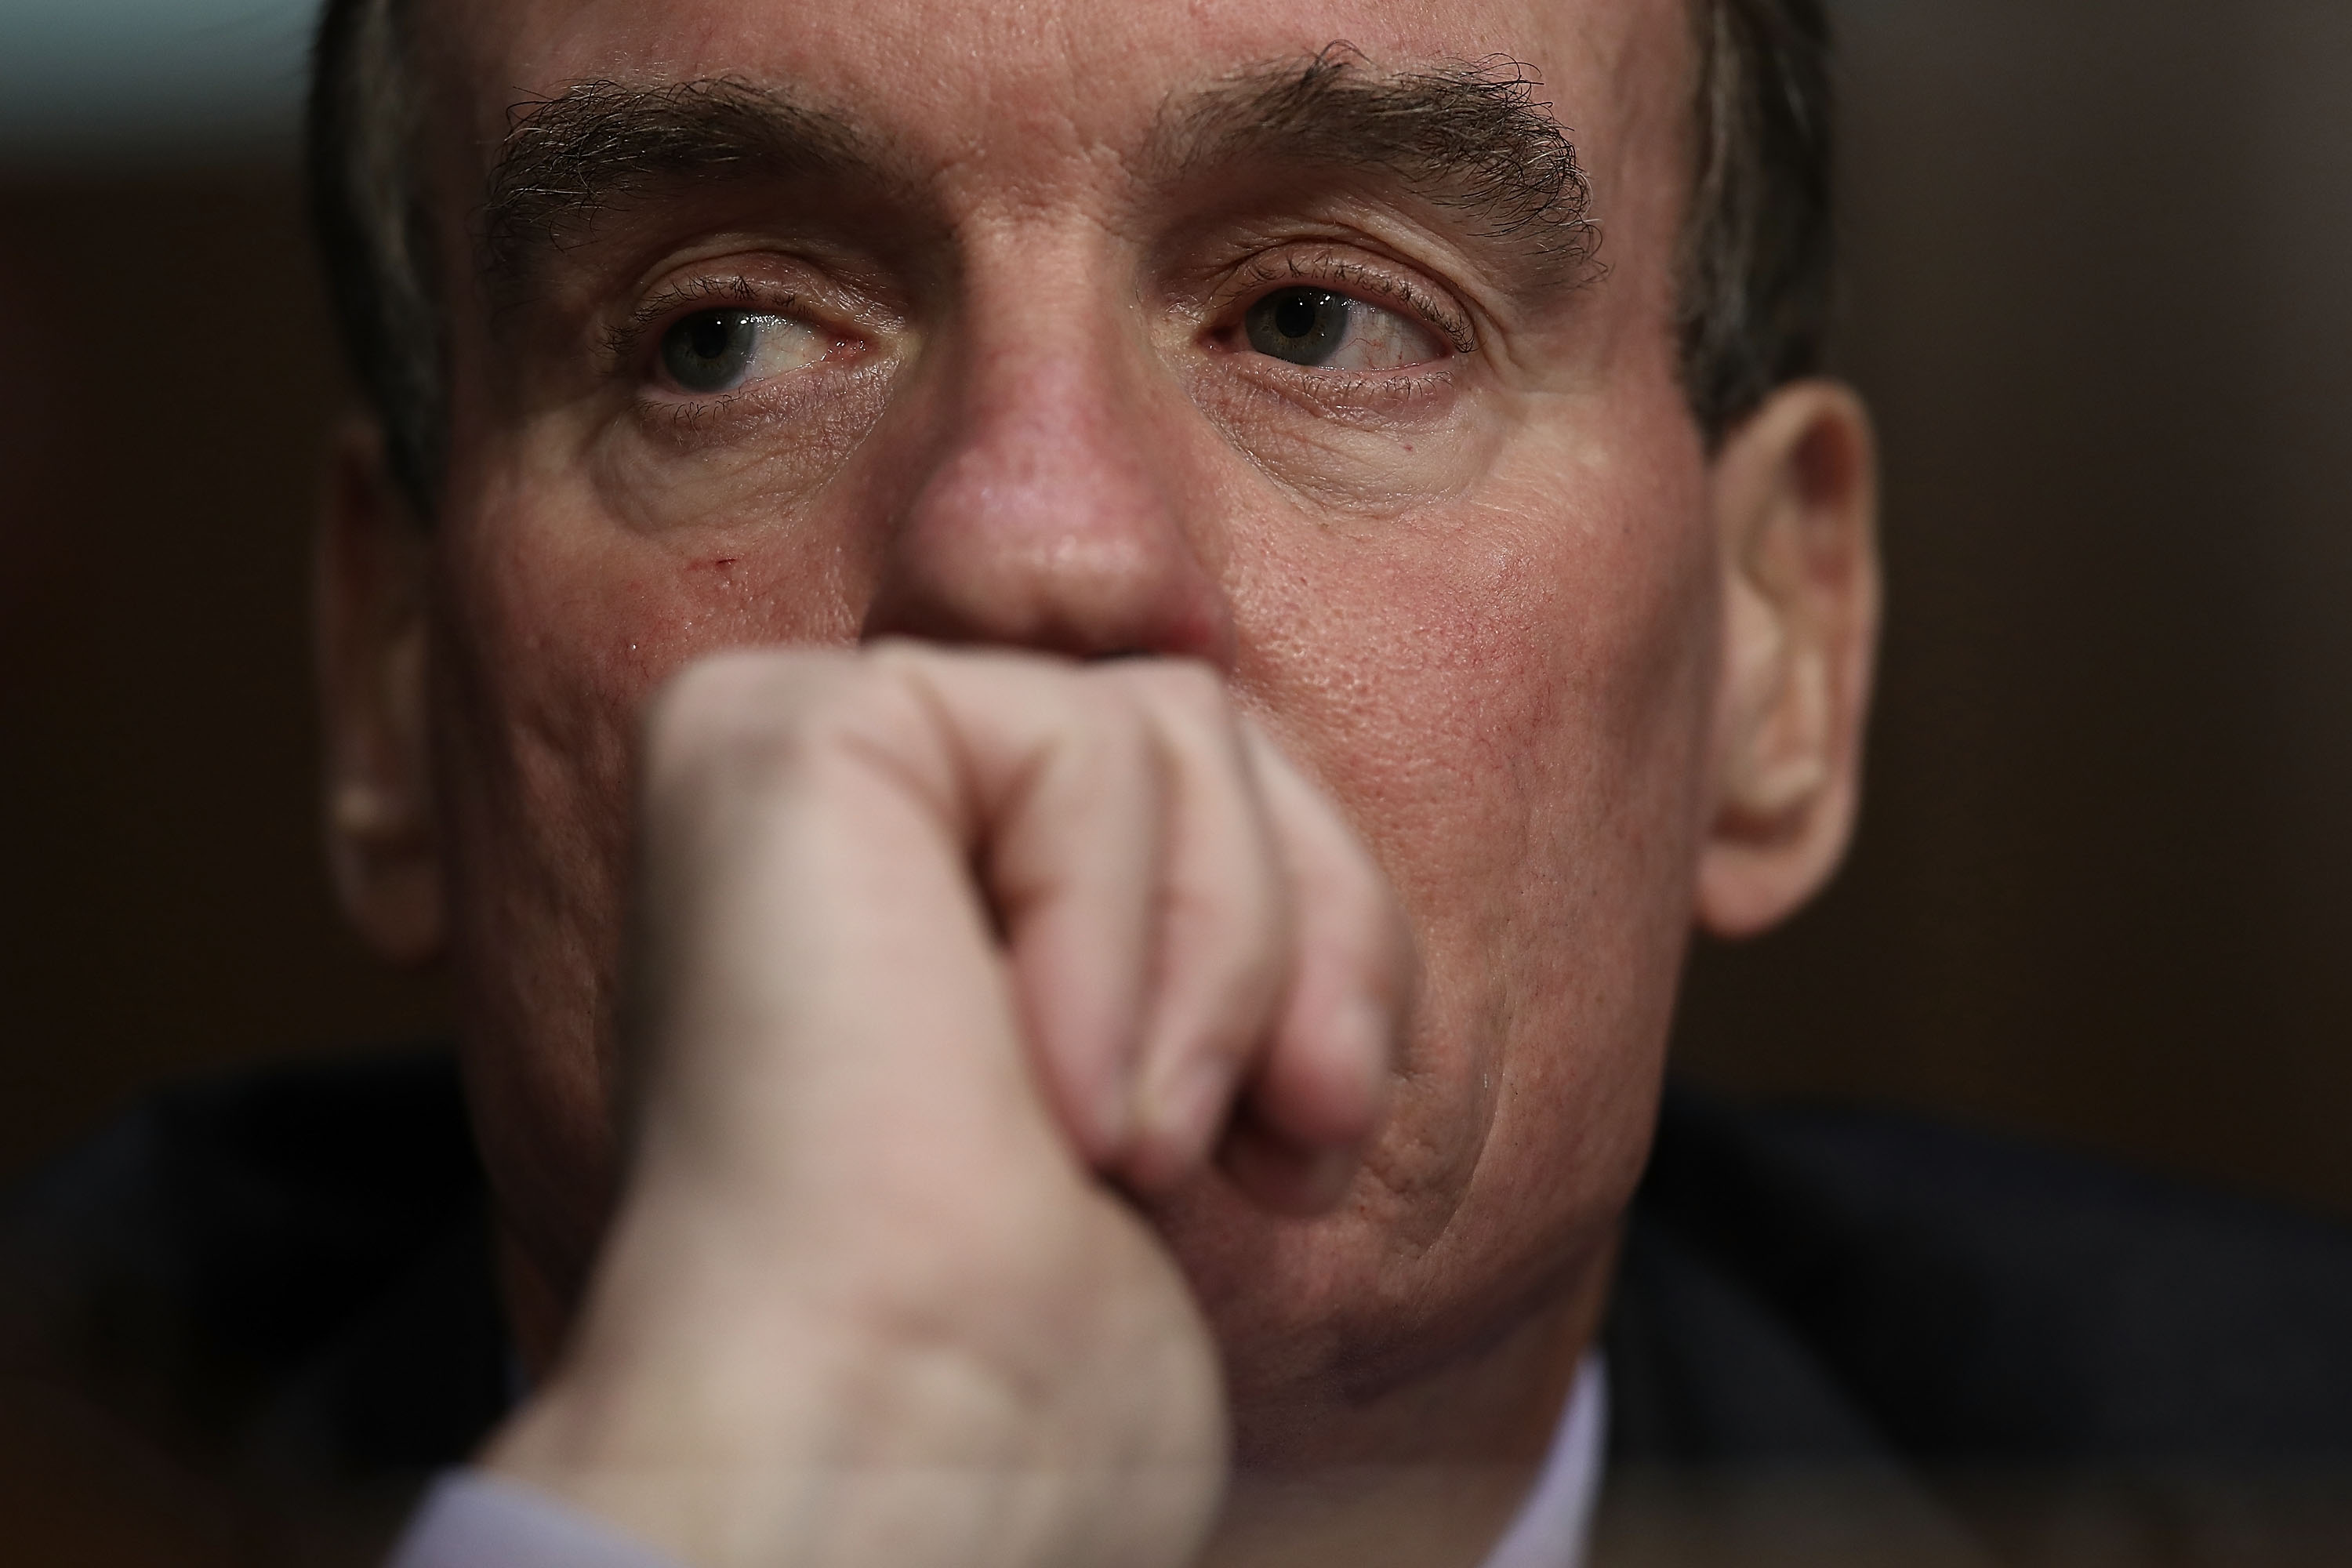 Sen. Mark Warner (D-VA) listens to testimony from U.S. Federal Reserve Board Chairwoman Janet Yellen during Yellen's testimony before the Senate Banking, Housing and Urban Affairs Committee in Washington, D.C., on June 21, 2016.